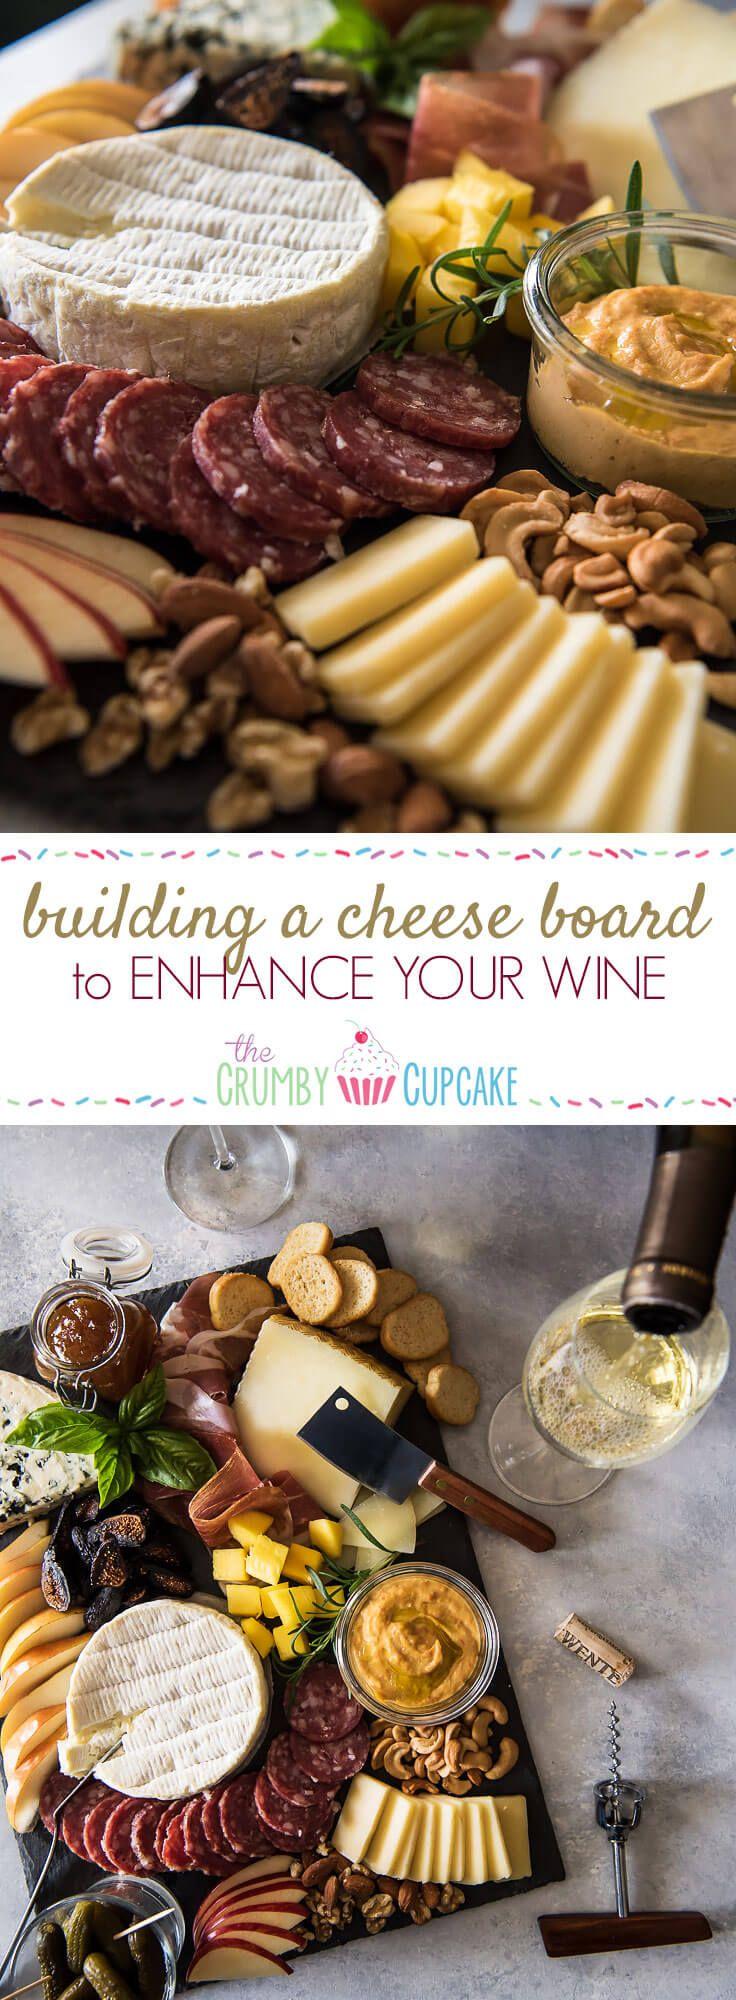 Wedding - How To Build A Cheese Board To Enhance Your Wine